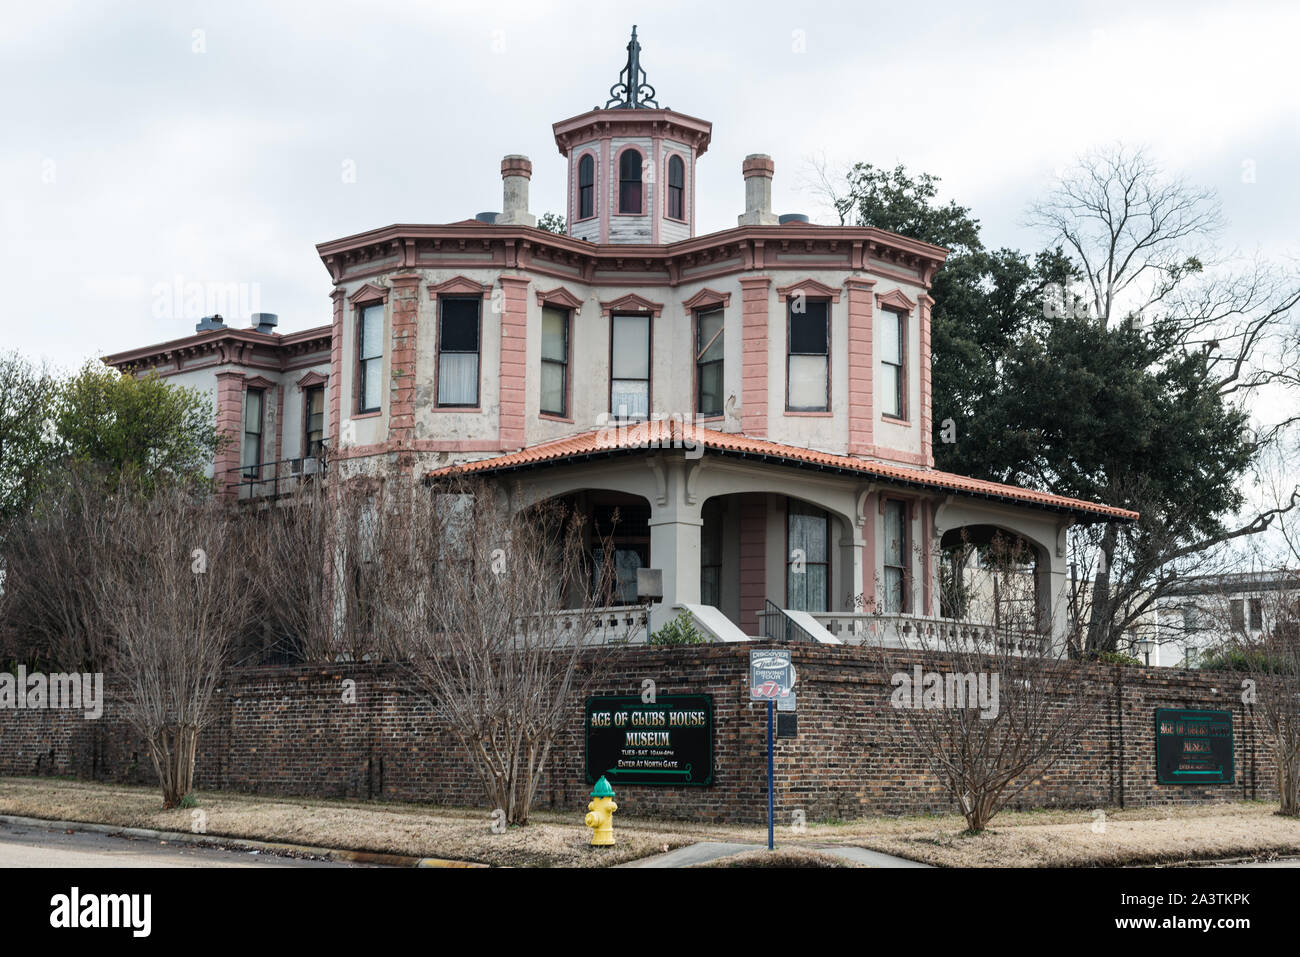 The Ace of Clubs House in Texarkana, Texas, more formally known as the Draughon-Moore home. The house was built in 1885 in roughly the shape of the club figure on the ace of clubs card in a poker deck, with three octagonal wings and a rectangular wing. According to legend, the house was built with money won from a poker game. It is now a city-owned tour home and museum Stock Photo